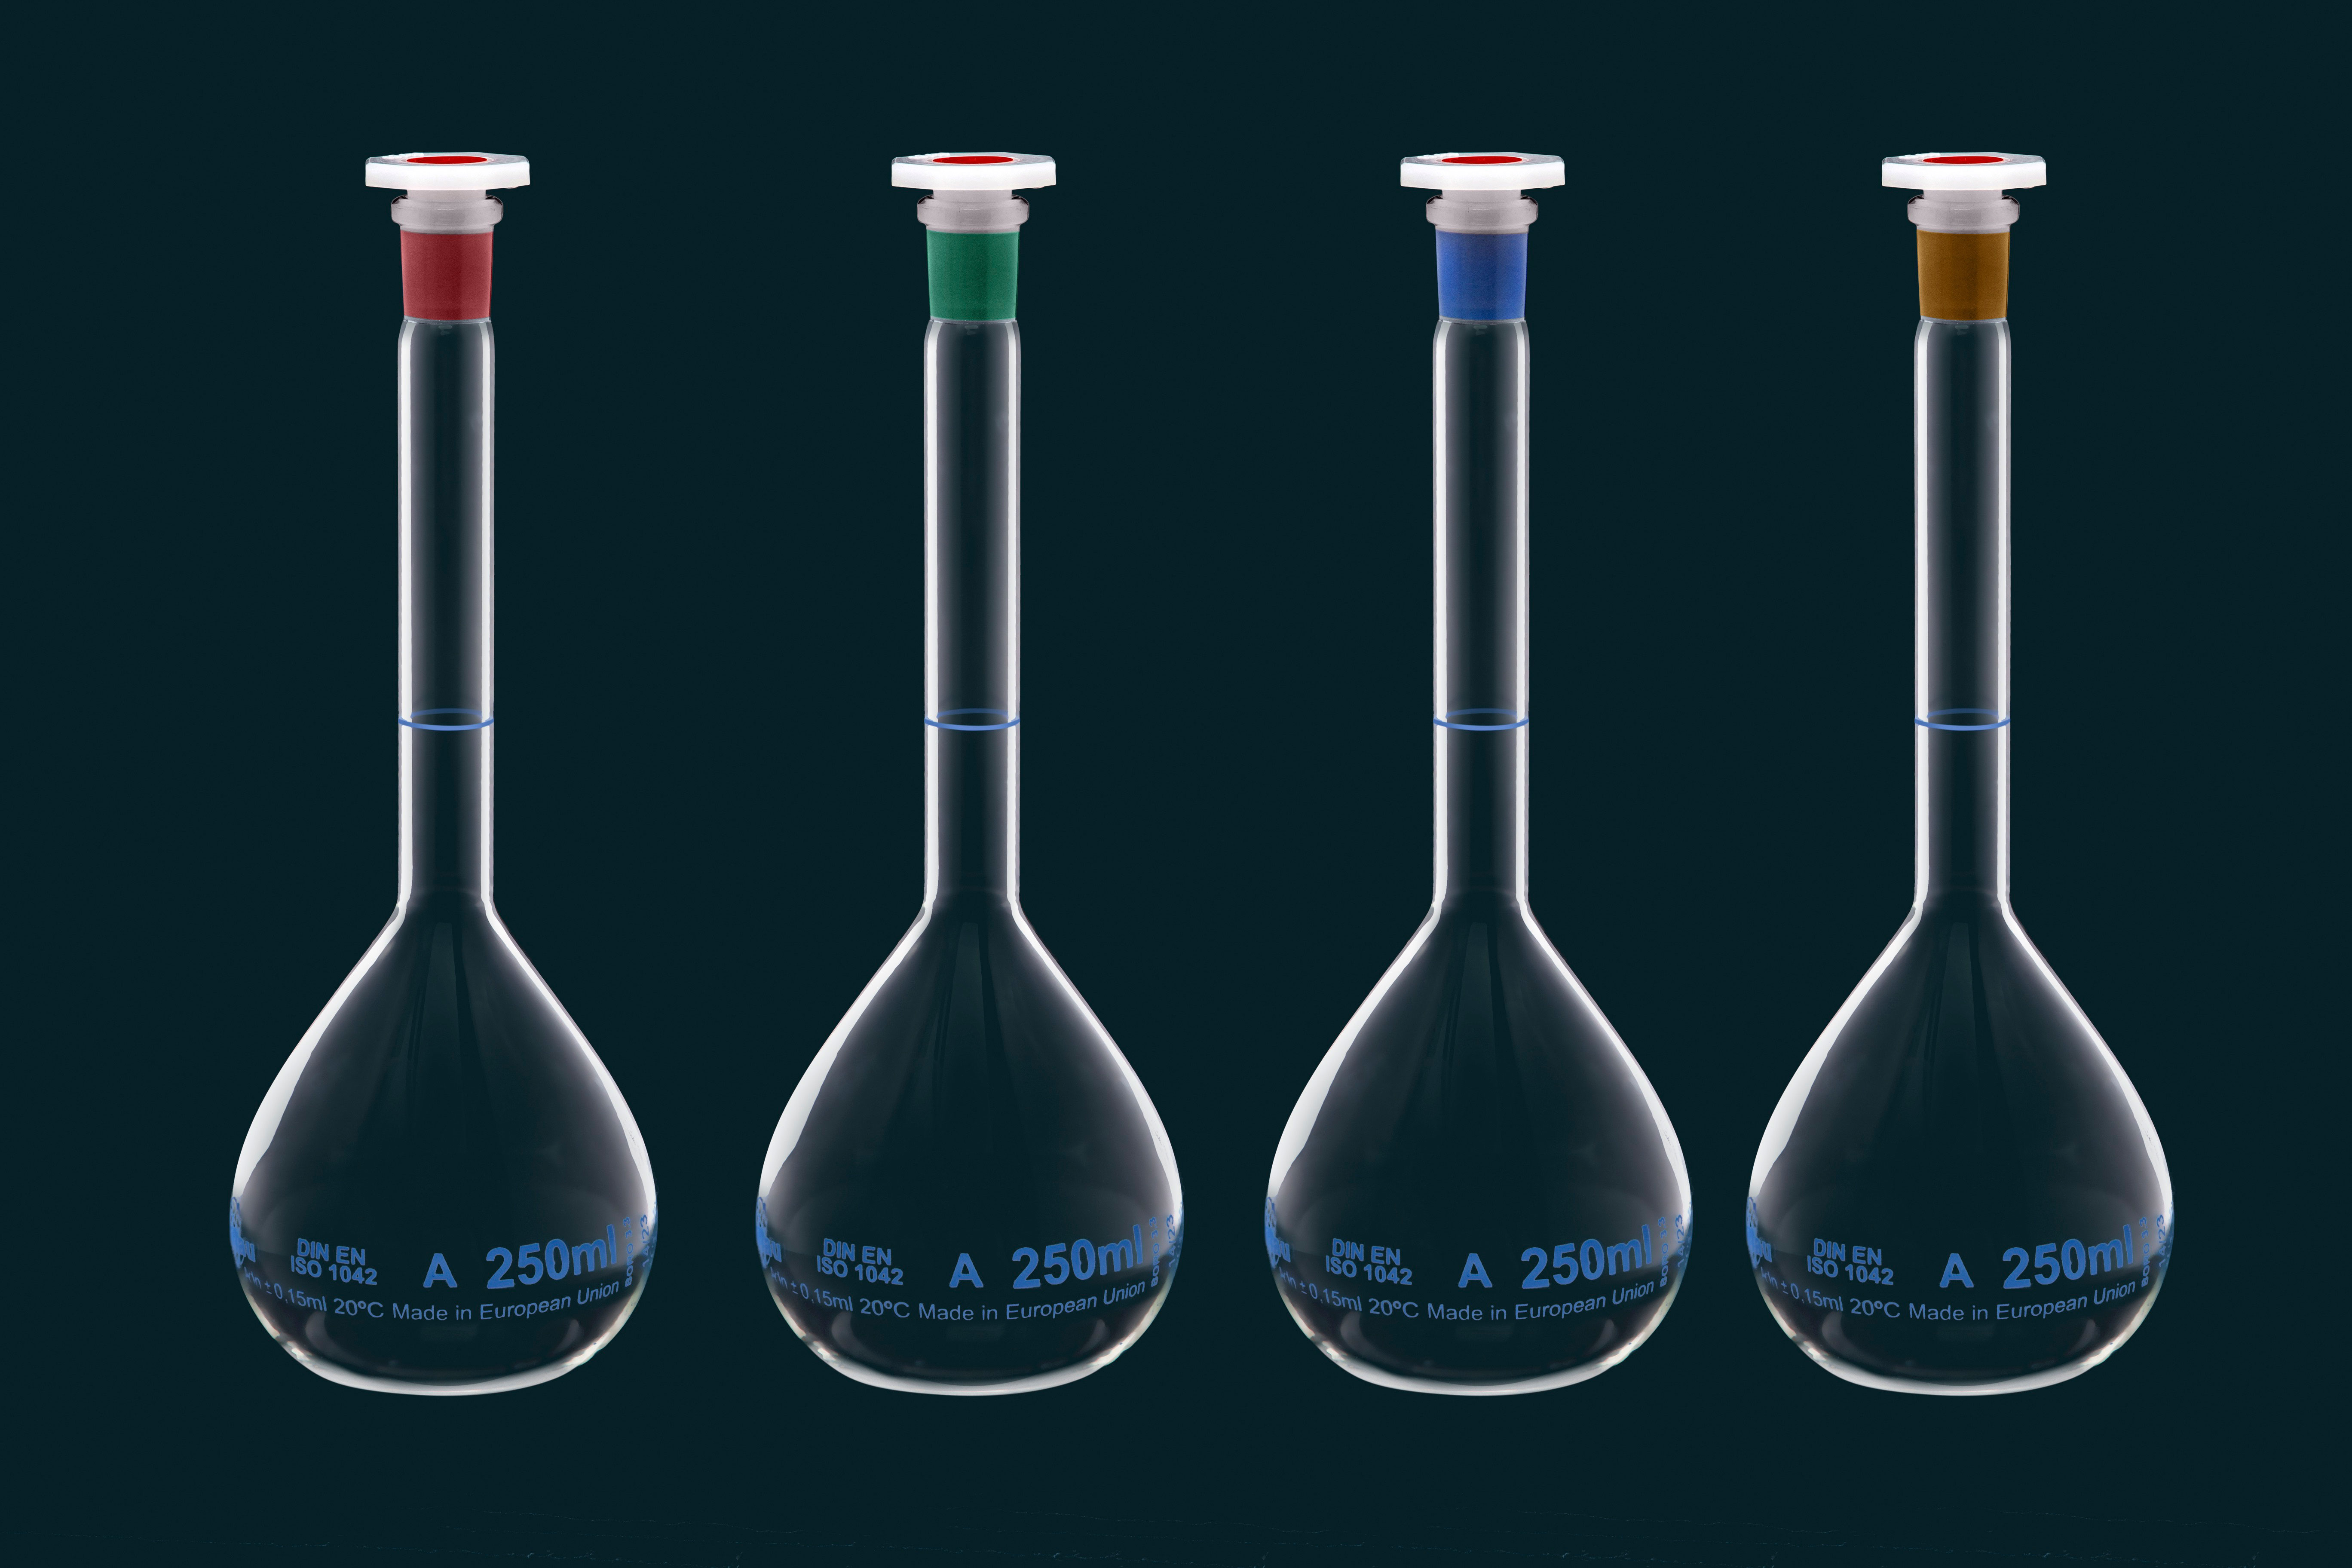 Volumetric flask with green neck, Class A, 200ml, with PE stopper, lot number and certificate of conformity